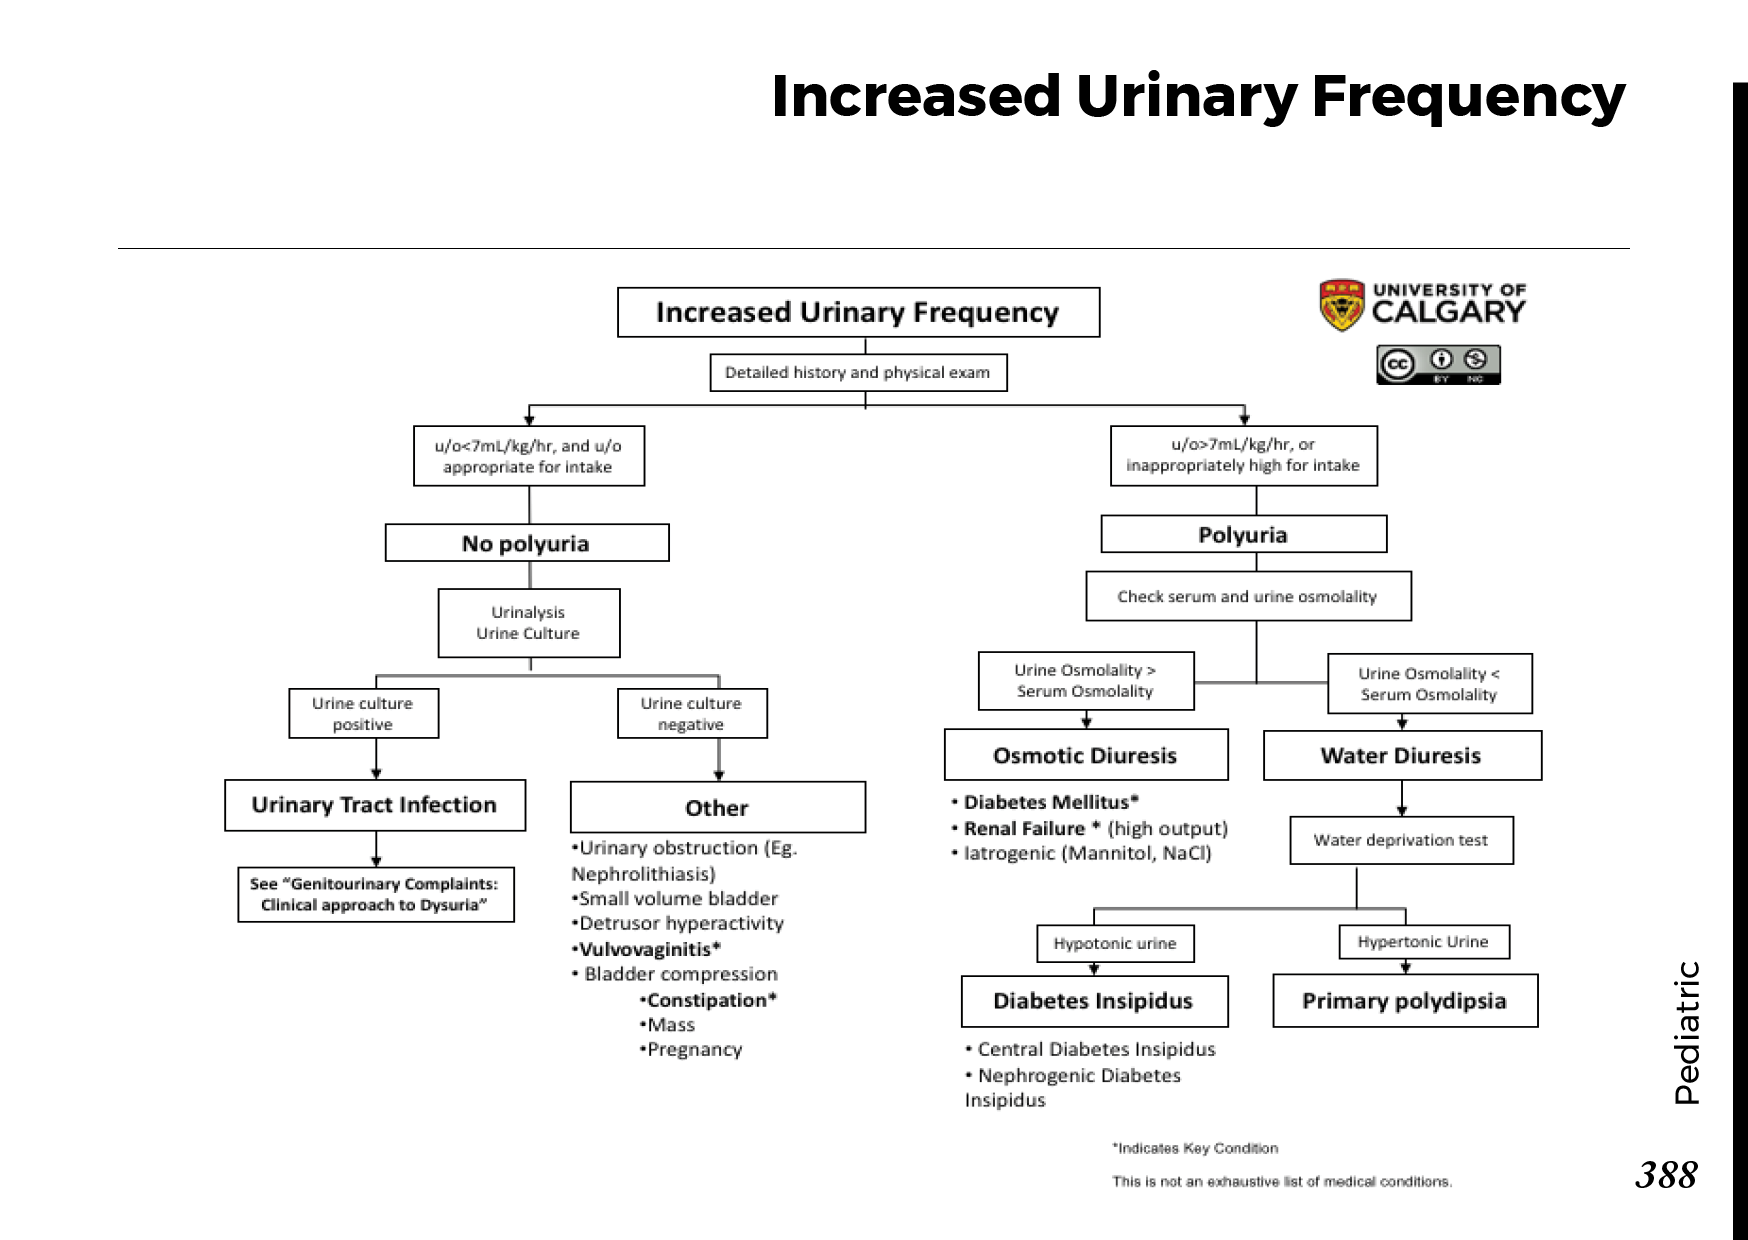 INCREASED URINARY FREQUENCY Scheme